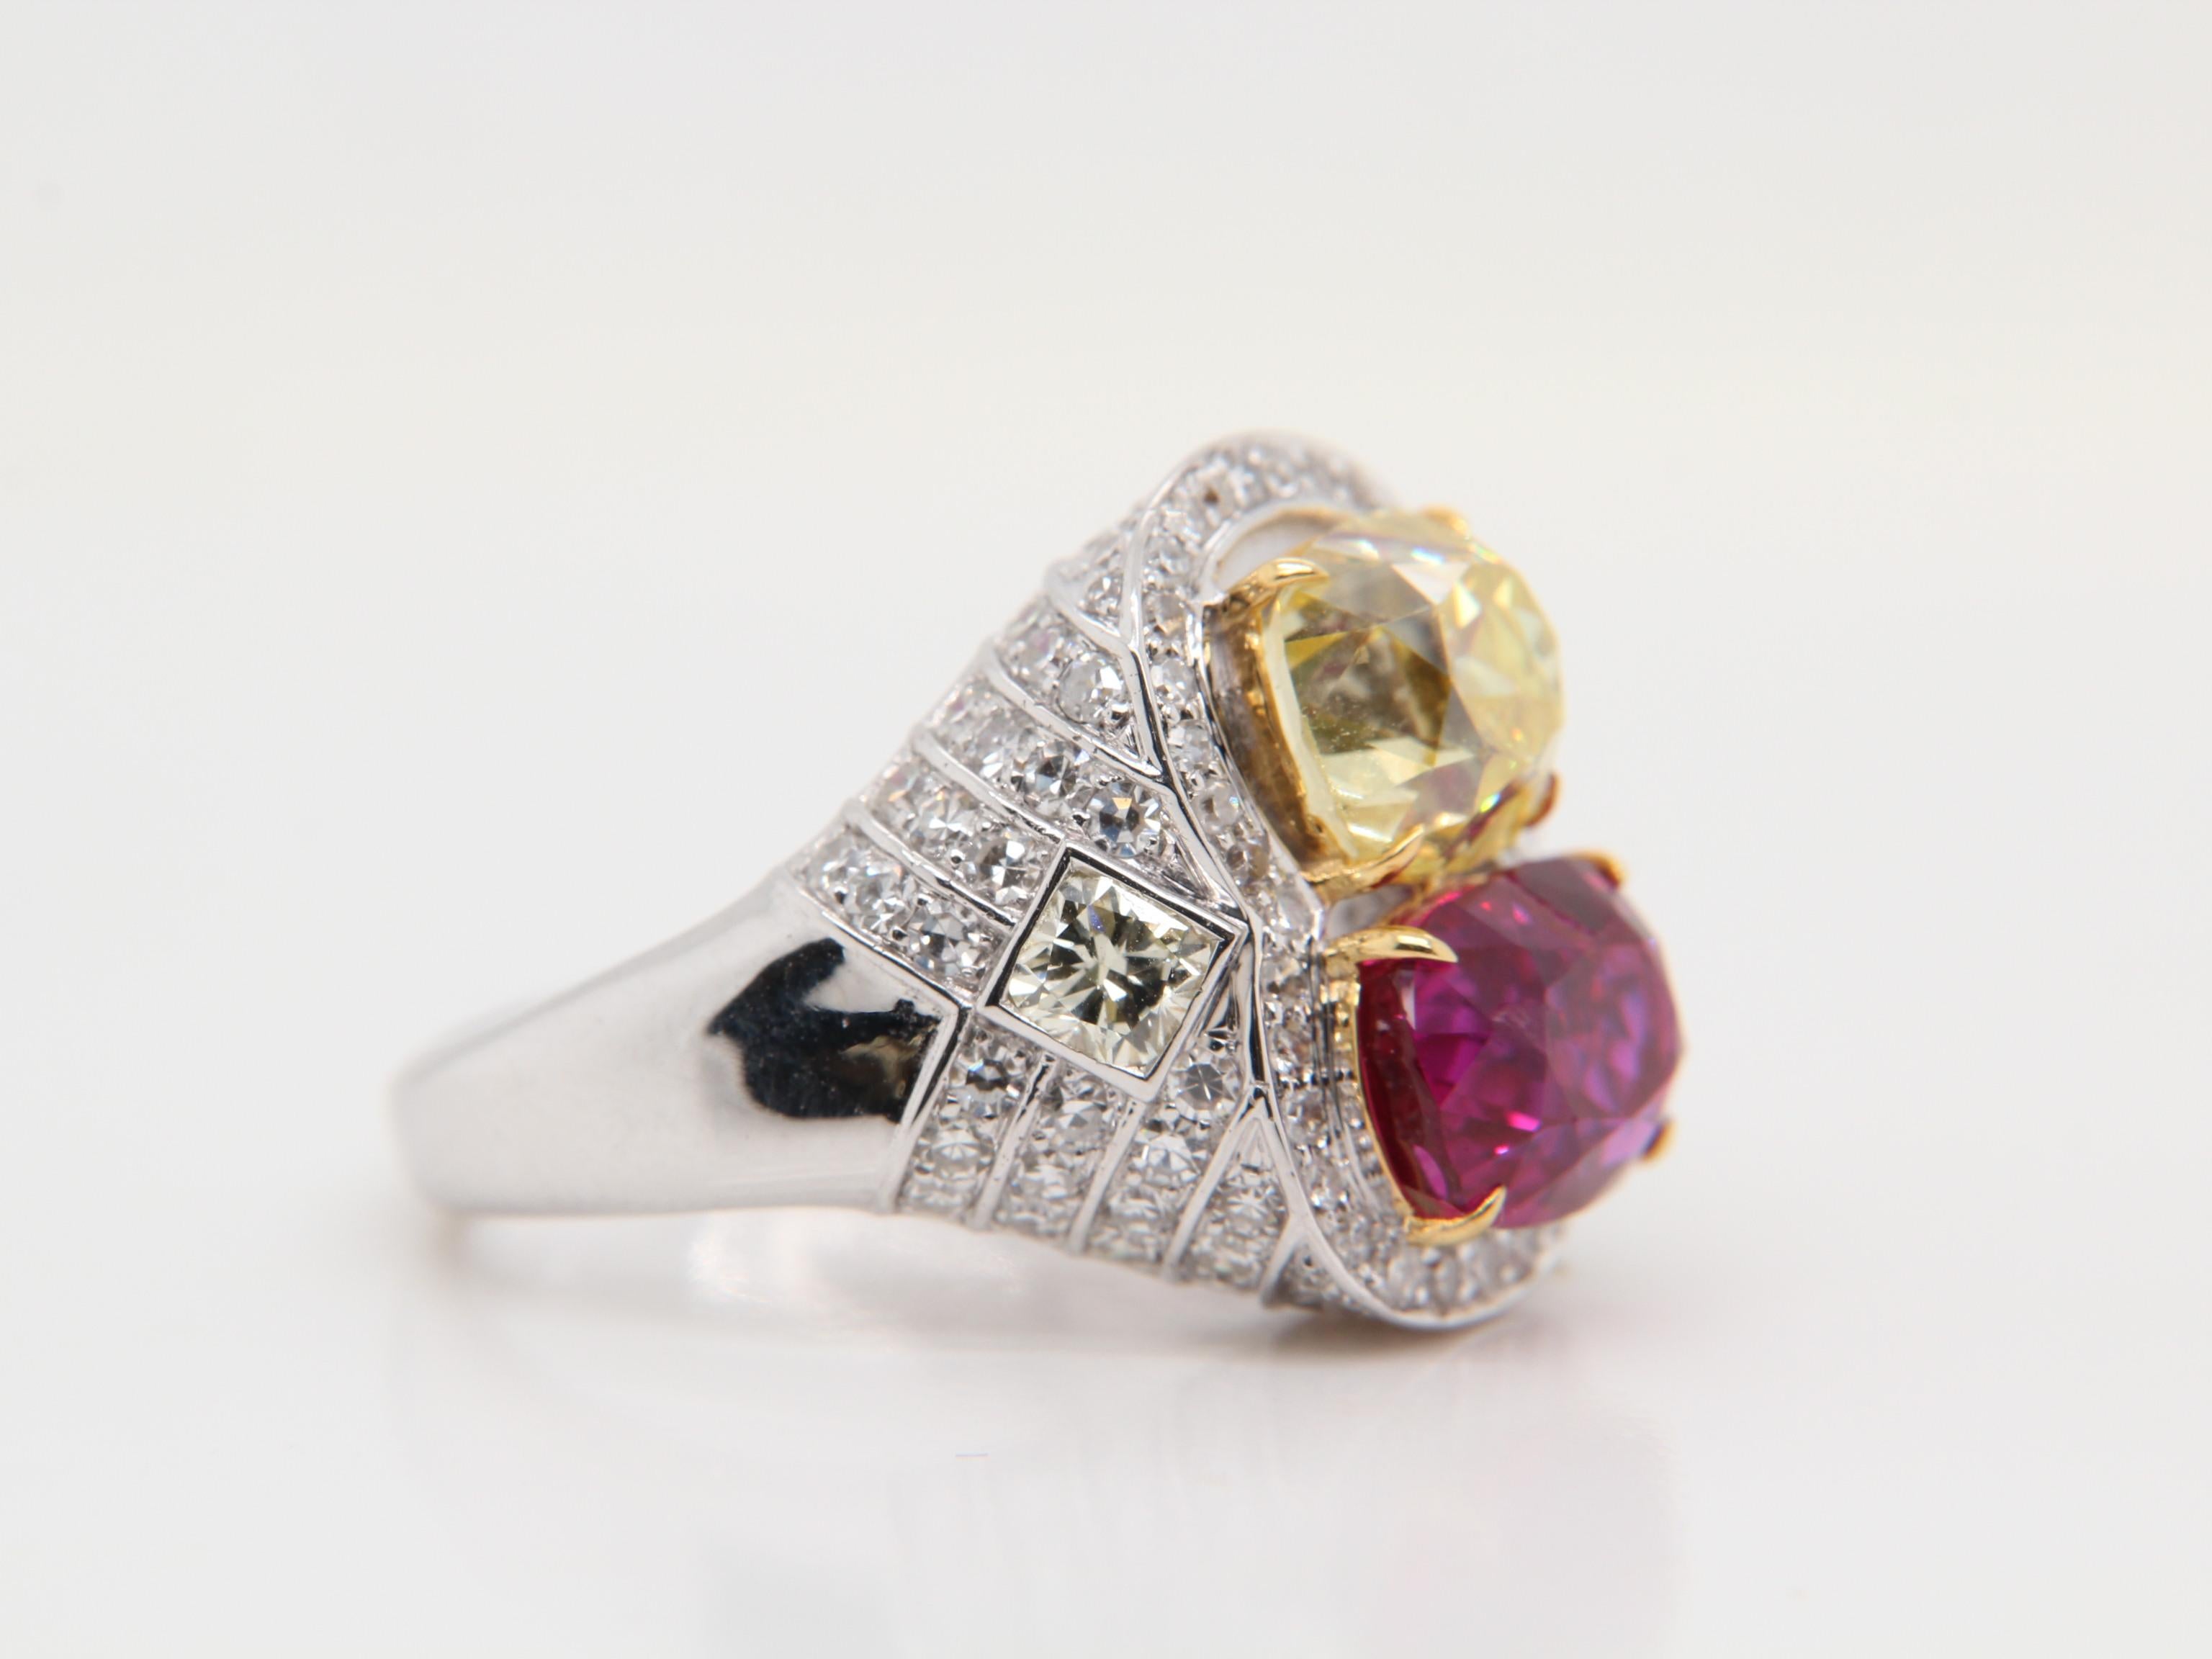 A stunning ruby and colourful diamond ring. The ruby weighs 4.43 carat and is certified by Gem Research Swisslab (GRS) as natural, no heat, and 'Red'. The Diamond weighs 3.09 carat and is certified by Gemological Institute of America (GIA) as